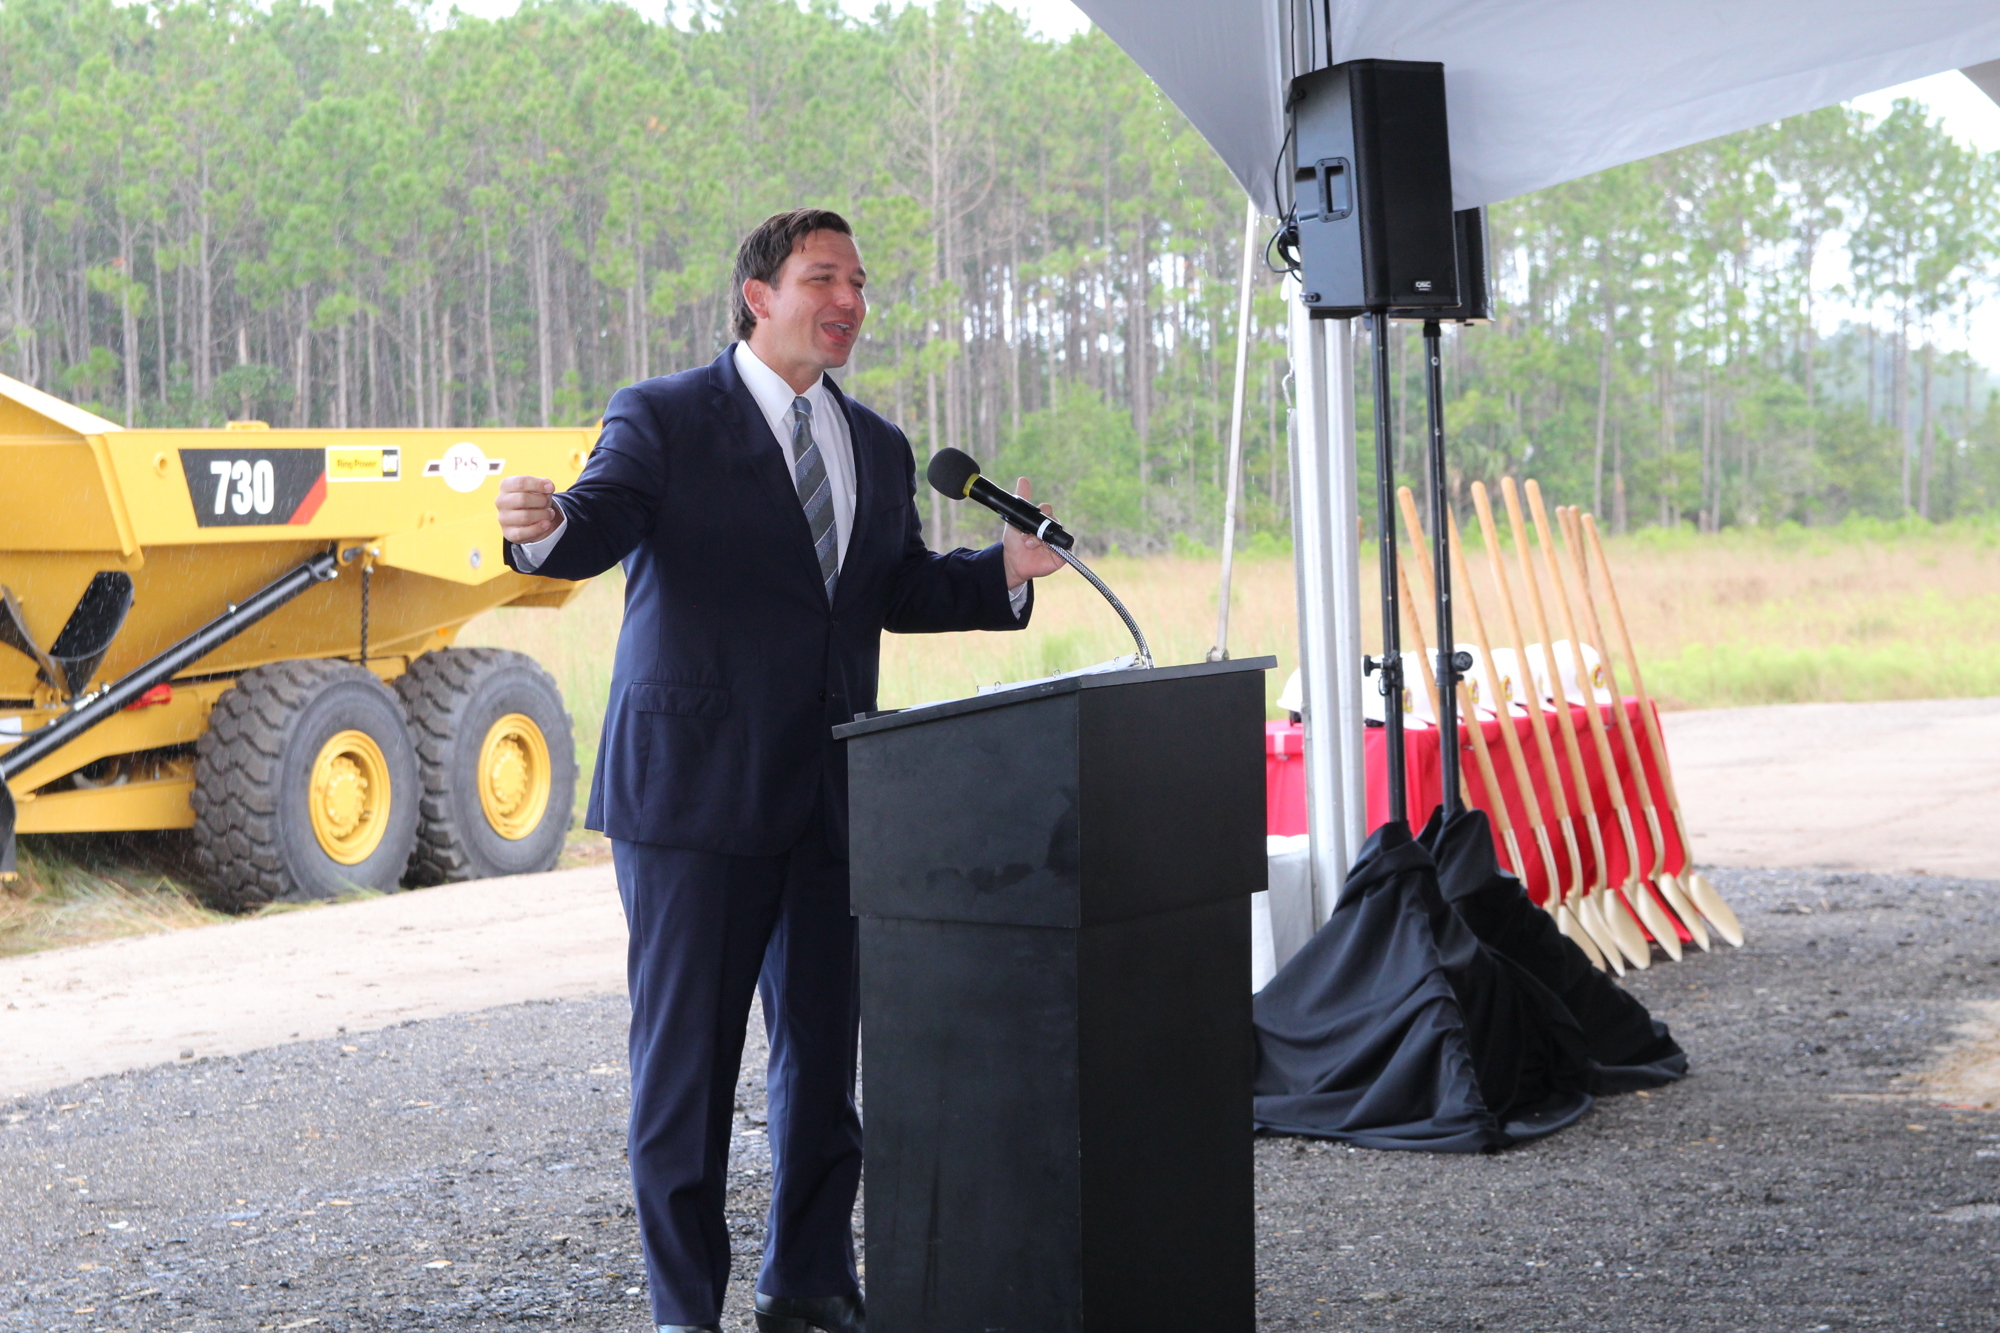 Governor Ron DeSantis talks about getting whatever one's travel needs are at Buc-ee's. Photo by Tanya Russo